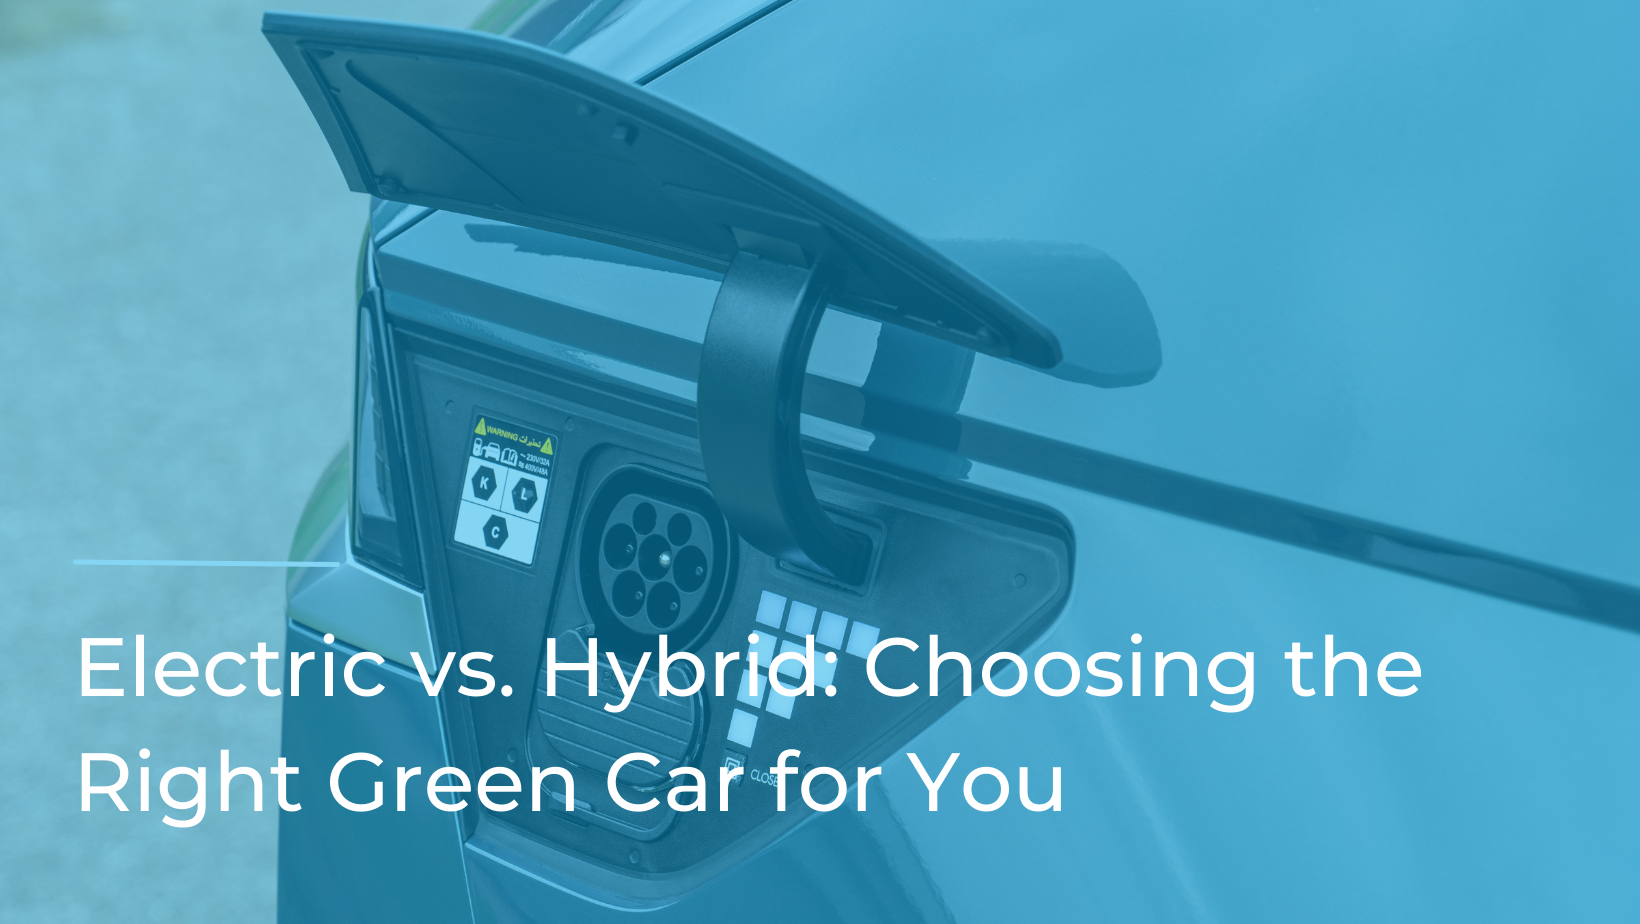 Electric vs. Hybrid: Choosing the Right Green Car for You